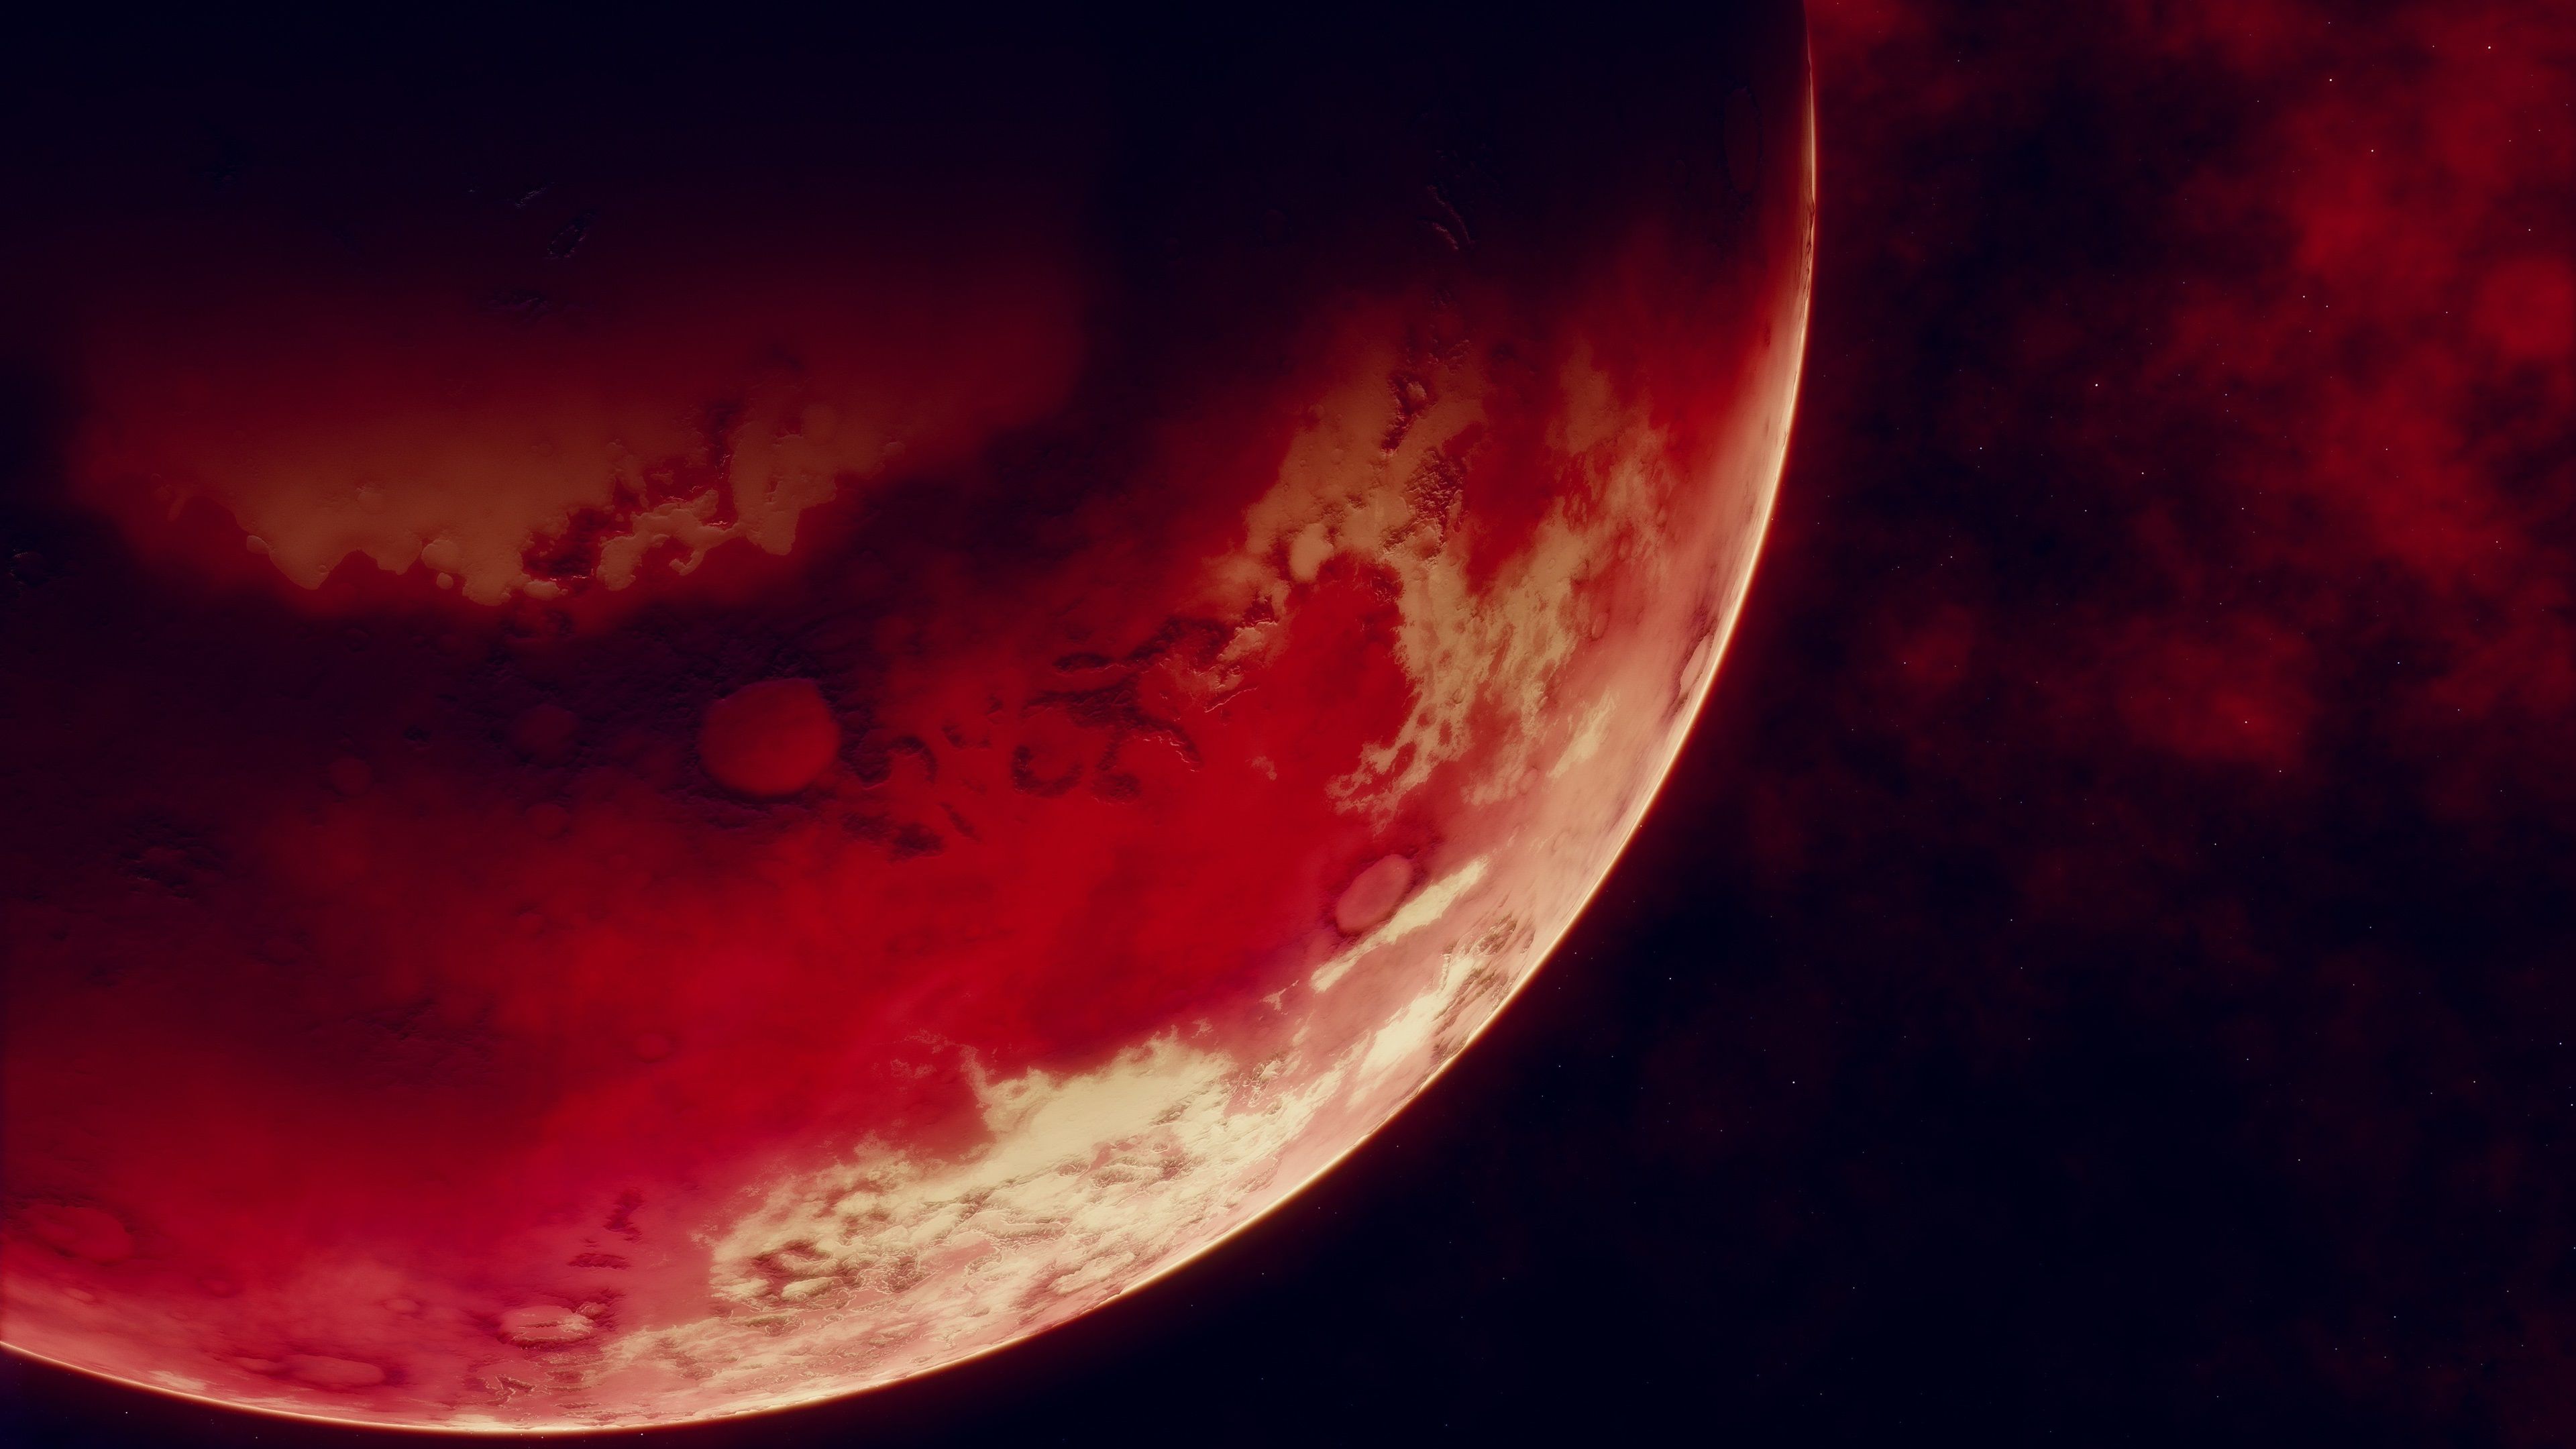 Wallpaper Red planet, space, black background 3840x2160 UHD 4K Picture, Image